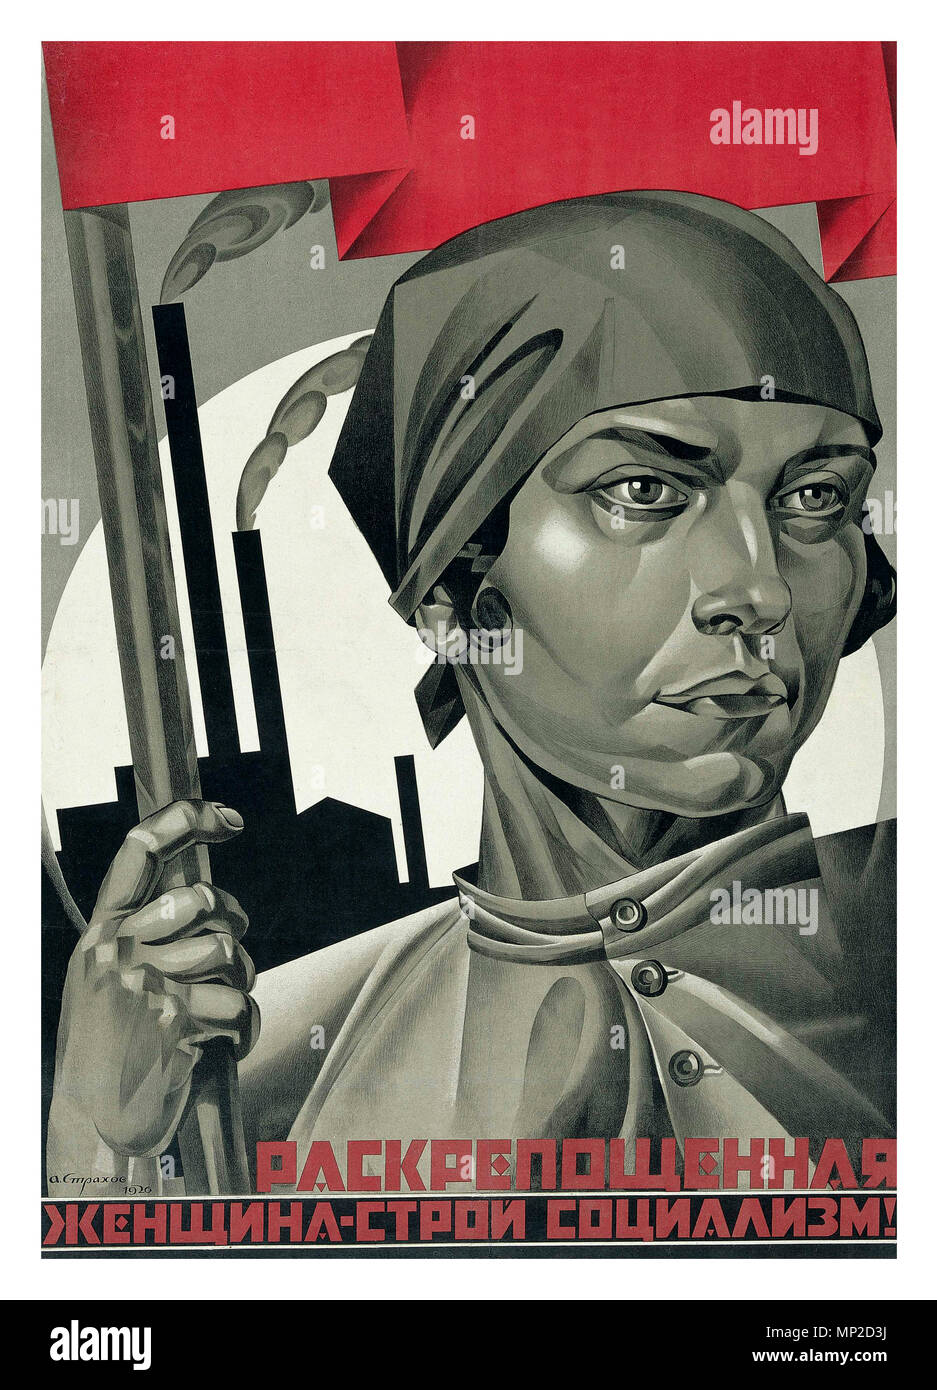 Vintage 1920’s Soviet USSR Russian Propaganda Poster  “Emancipated Woman – Build Socialism! “. 1926. Russian Revolution Propaganda Soviet Trotsky graphic revolutionary art by Adolf Strakhov, illustrating a woman worker holding a red flag with industrial scene in background, Strakhov portrays the politicised woman factory worker as an integral part of the class struggle. Soviet communist policy, overwhelmingly decided by men, opposed the idea of an independent women's liberation movement. Stock Photo